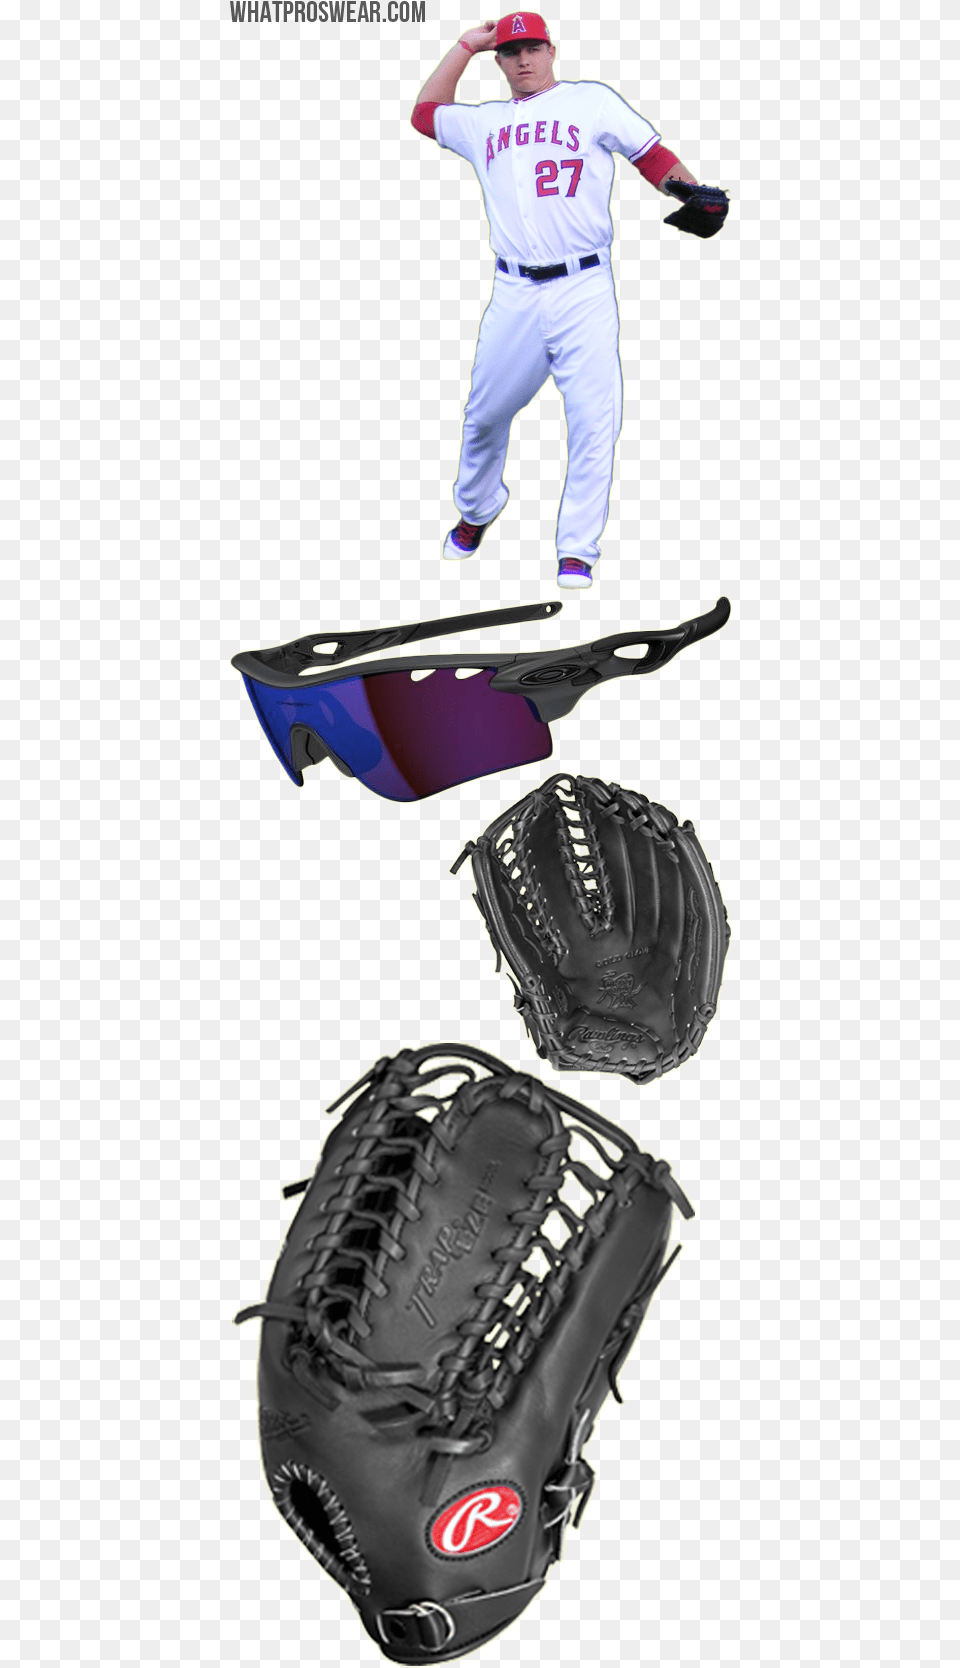 Mike Trout Glove Model Mike Trout Sunglasses Rawlings Mike Trout With Baseball Sunglasses, Person, People, Clothing, Baseball Glove Png Image